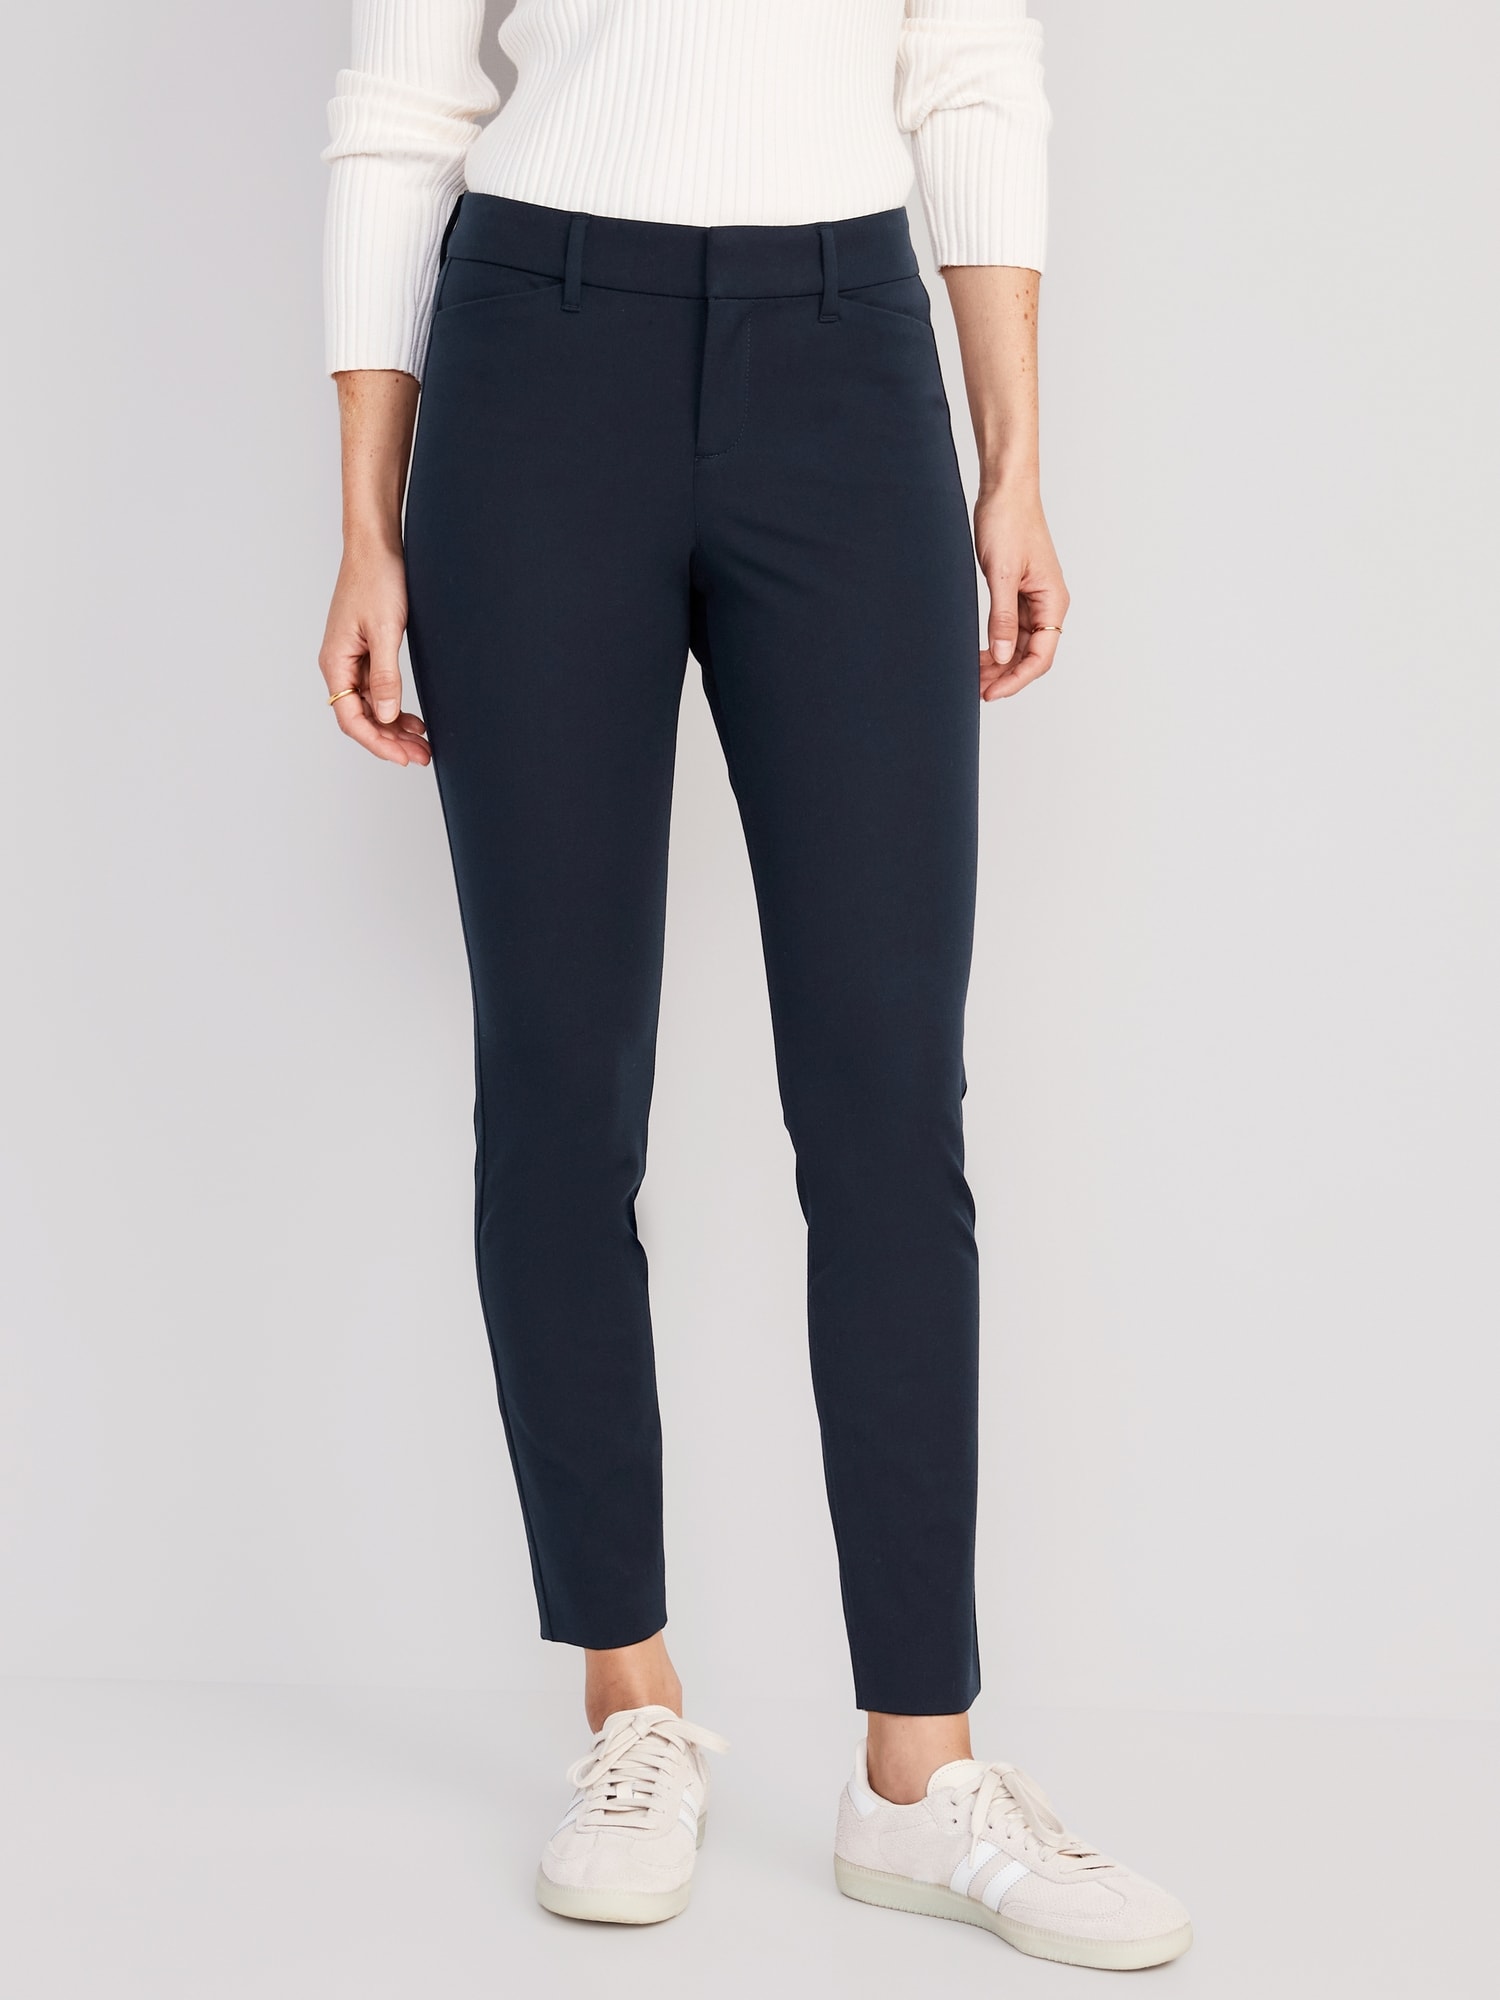 Mid-Rise Pixie Skinny Ankle Pants Hot Deal